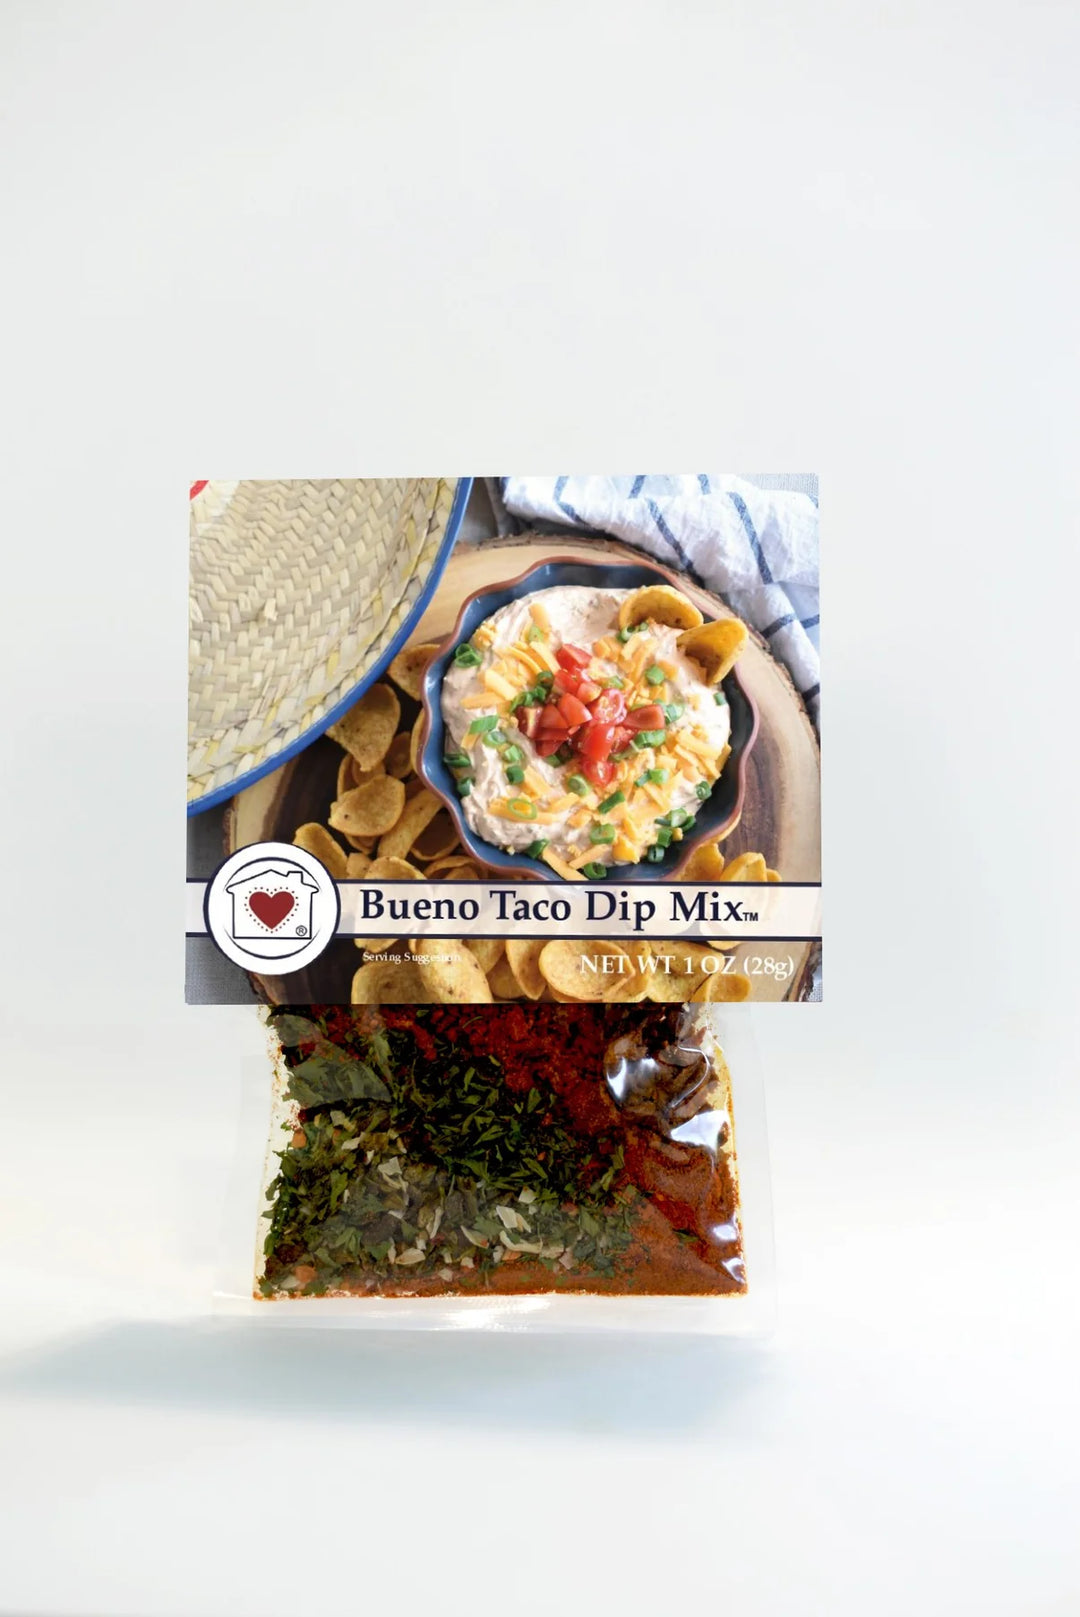 Country Home Creations Dip Mix